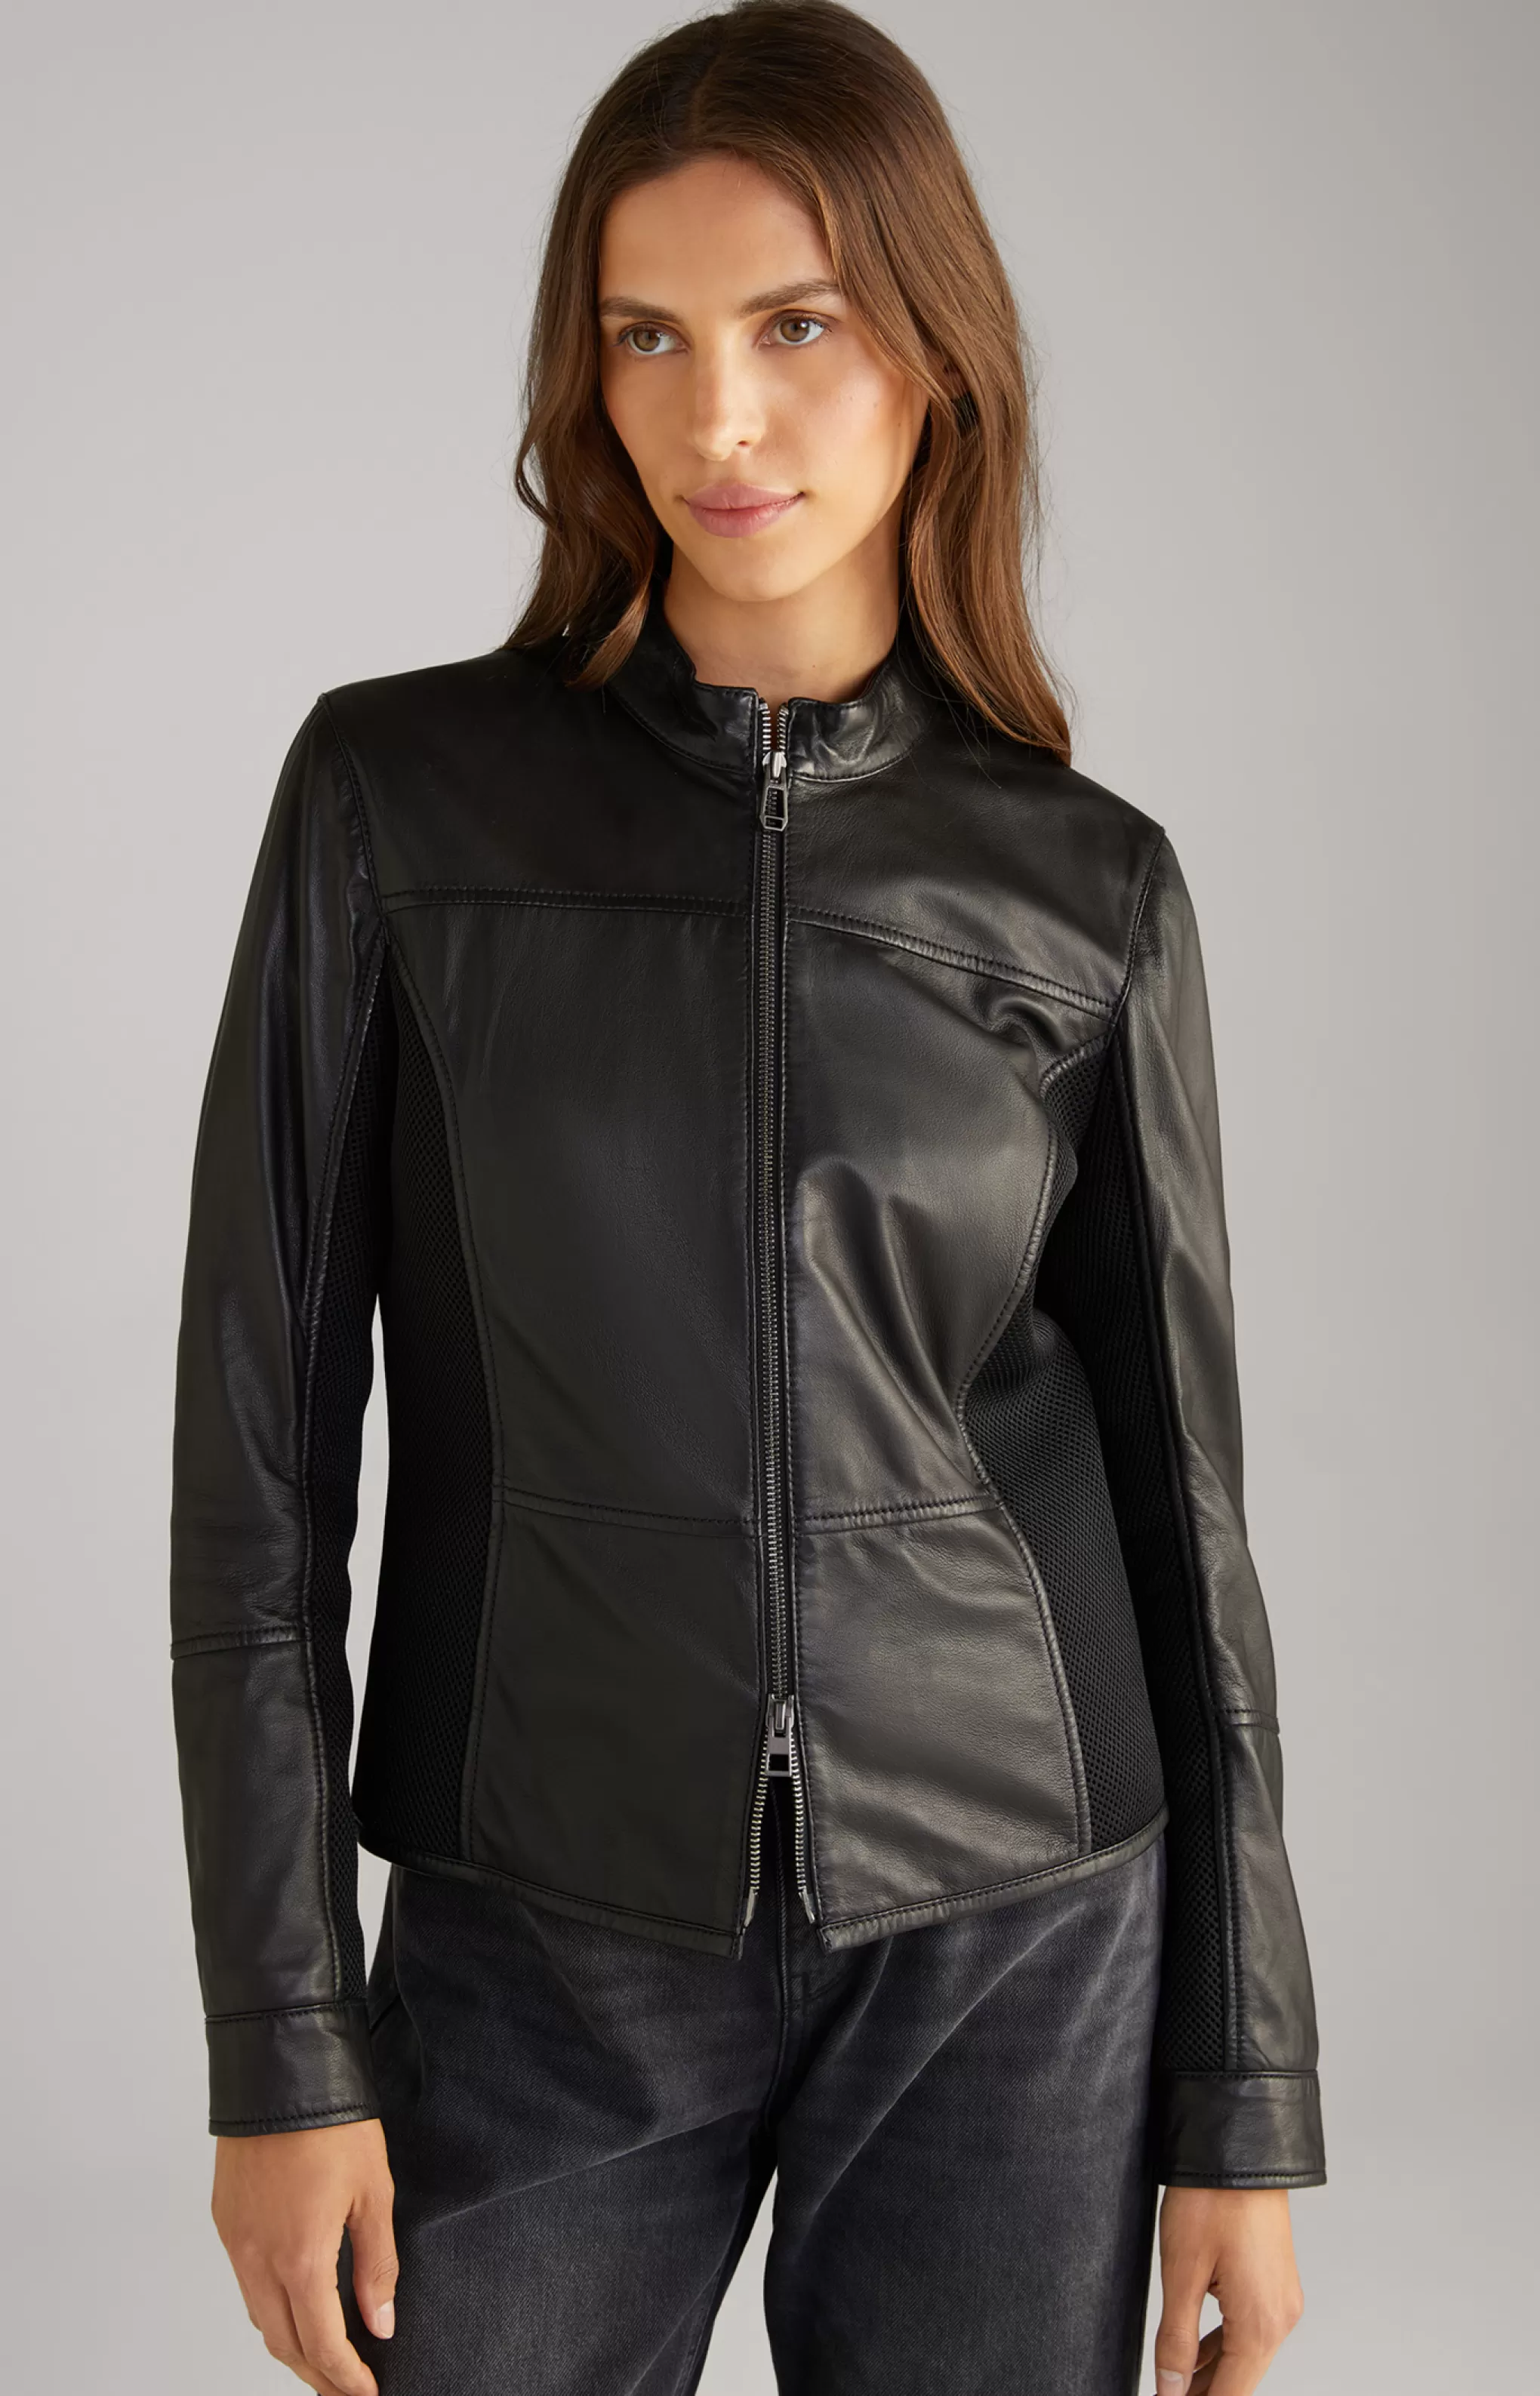 Leather | Jackets And Coats | Clothing*JOOP Leather | Jackets And Coats | Clothing Leather Jacket in